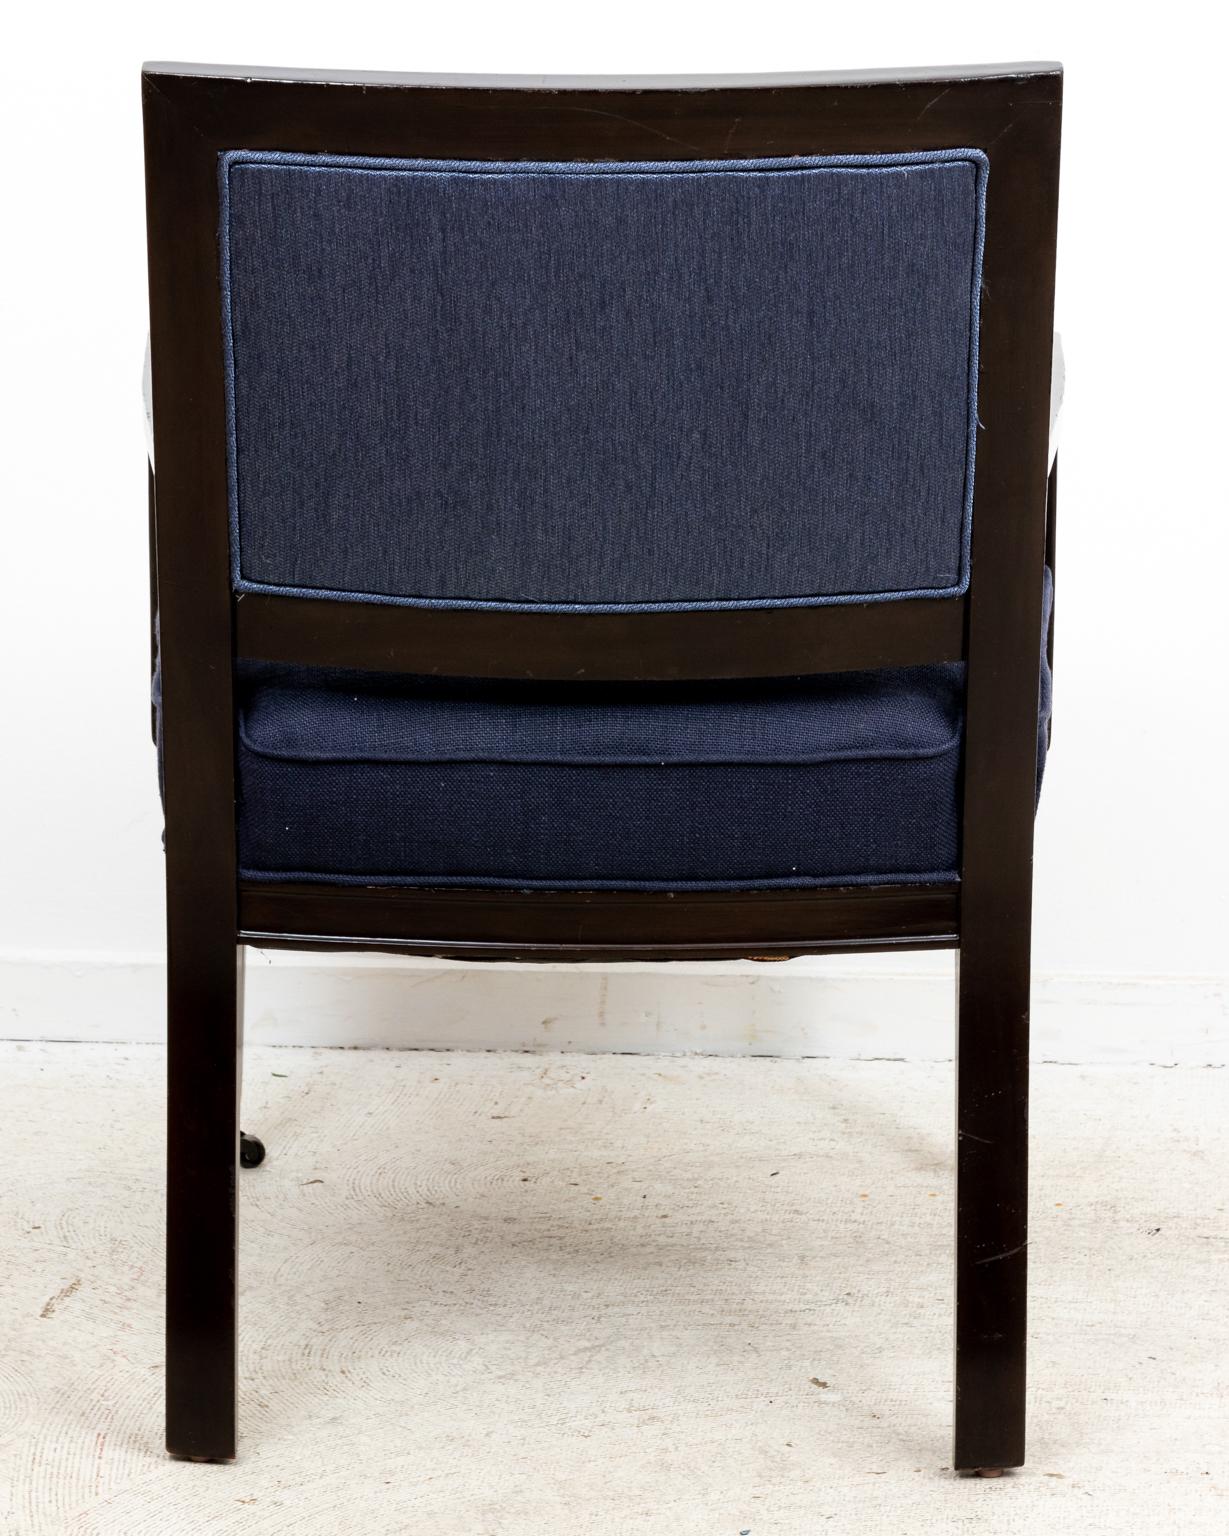 Circa 1970s pair of Mid-Century Modern square back Mahogany armchairs with dark blue upholstery and brushed brass castors. Made in the United States. Please note of wear consistent with age.